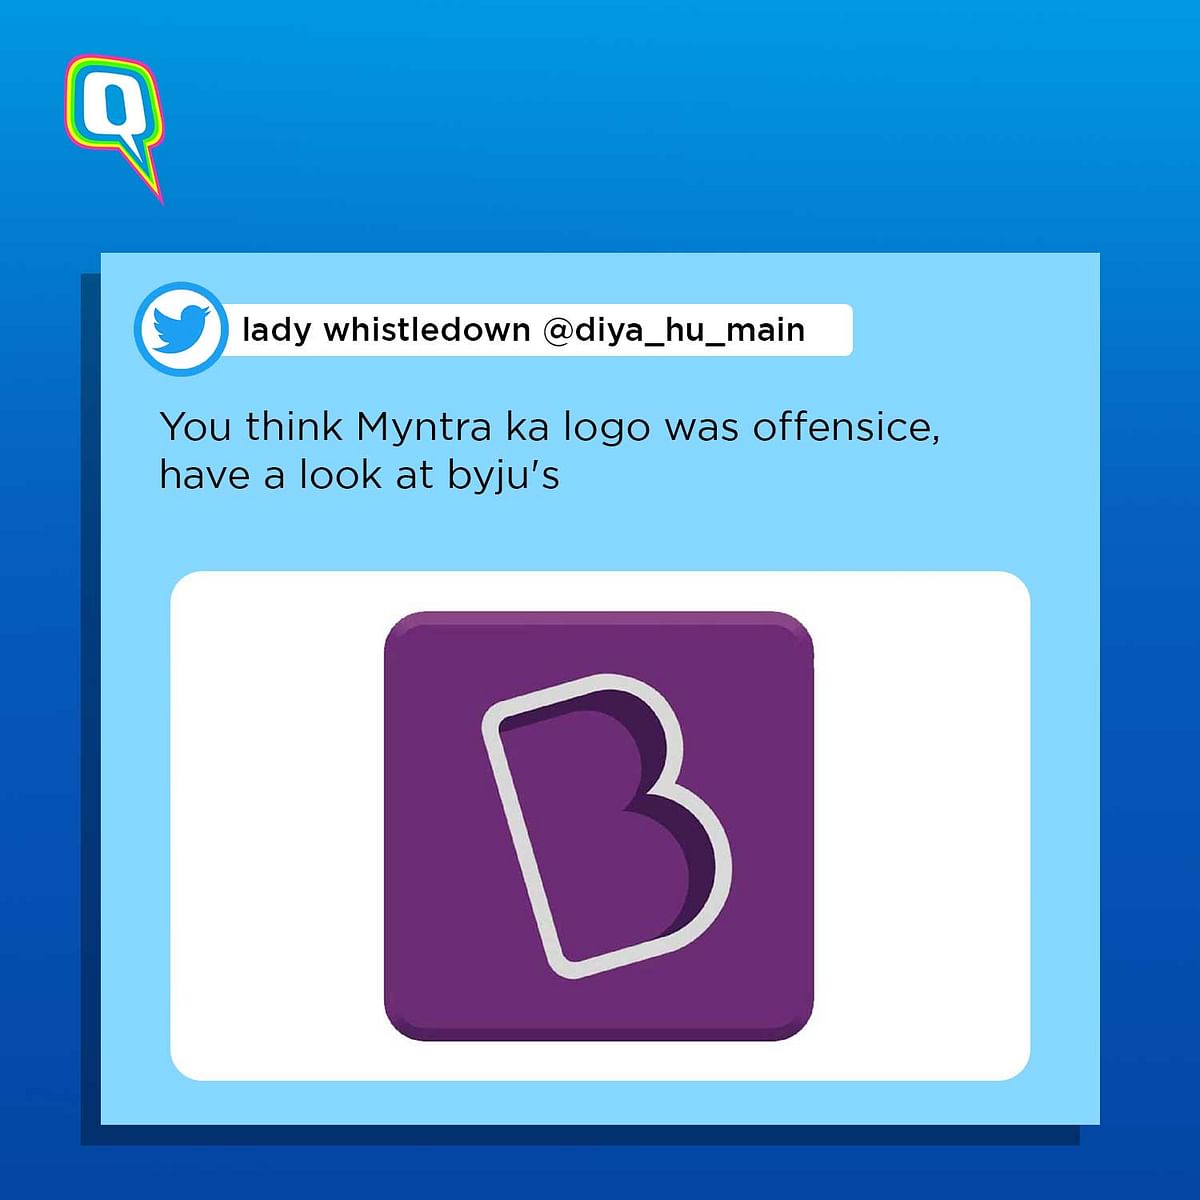 A Complaint was lodged alleging that the logo of e-commerce brand Myntra, is offensive and insulting to women.